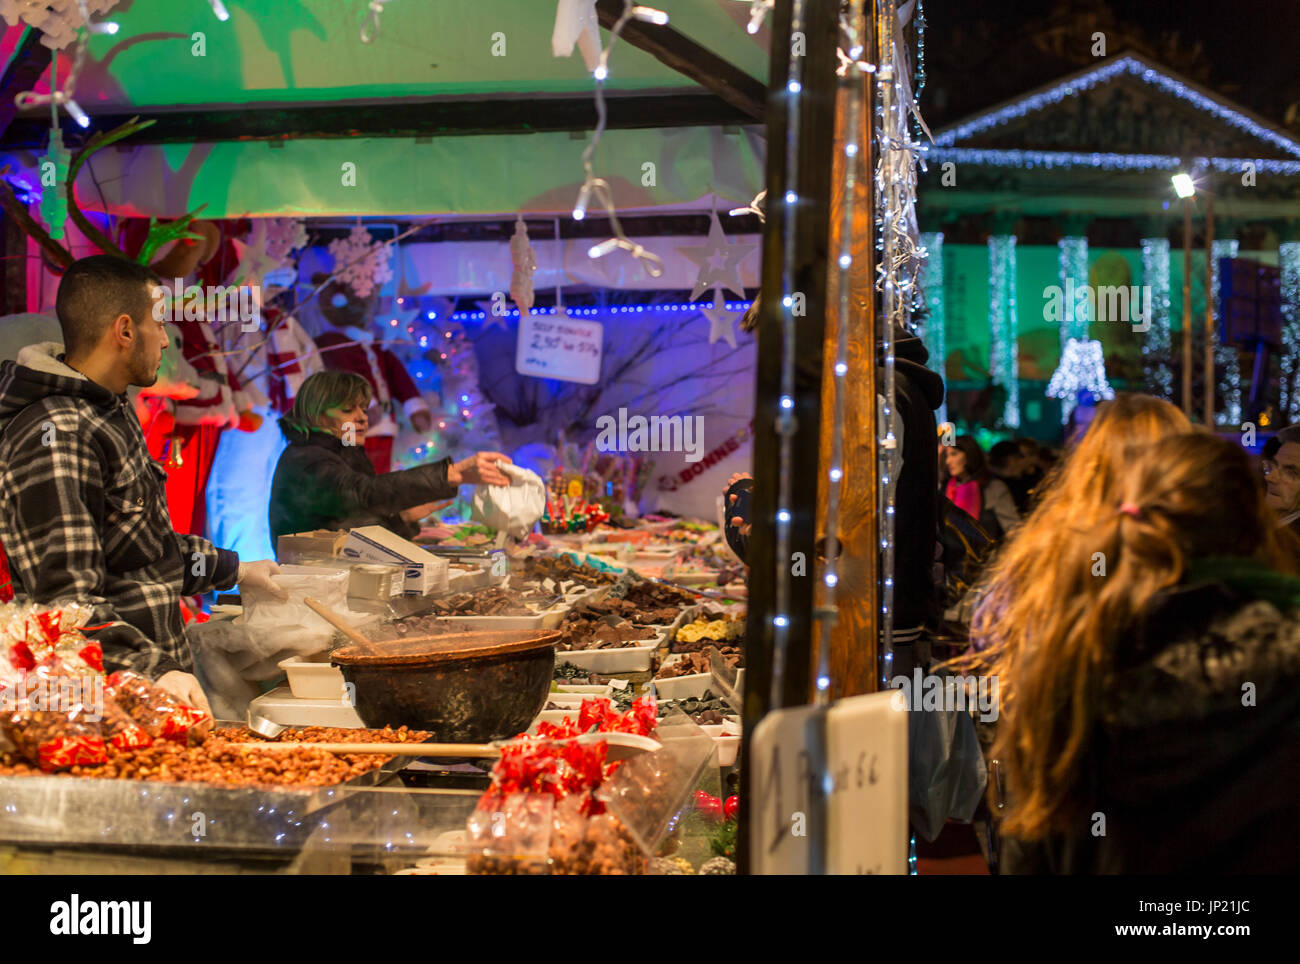 Brussels, Belgium - December 8, 2013: Christmas market food stall and lights in Brussels, Belgium Stock Photo